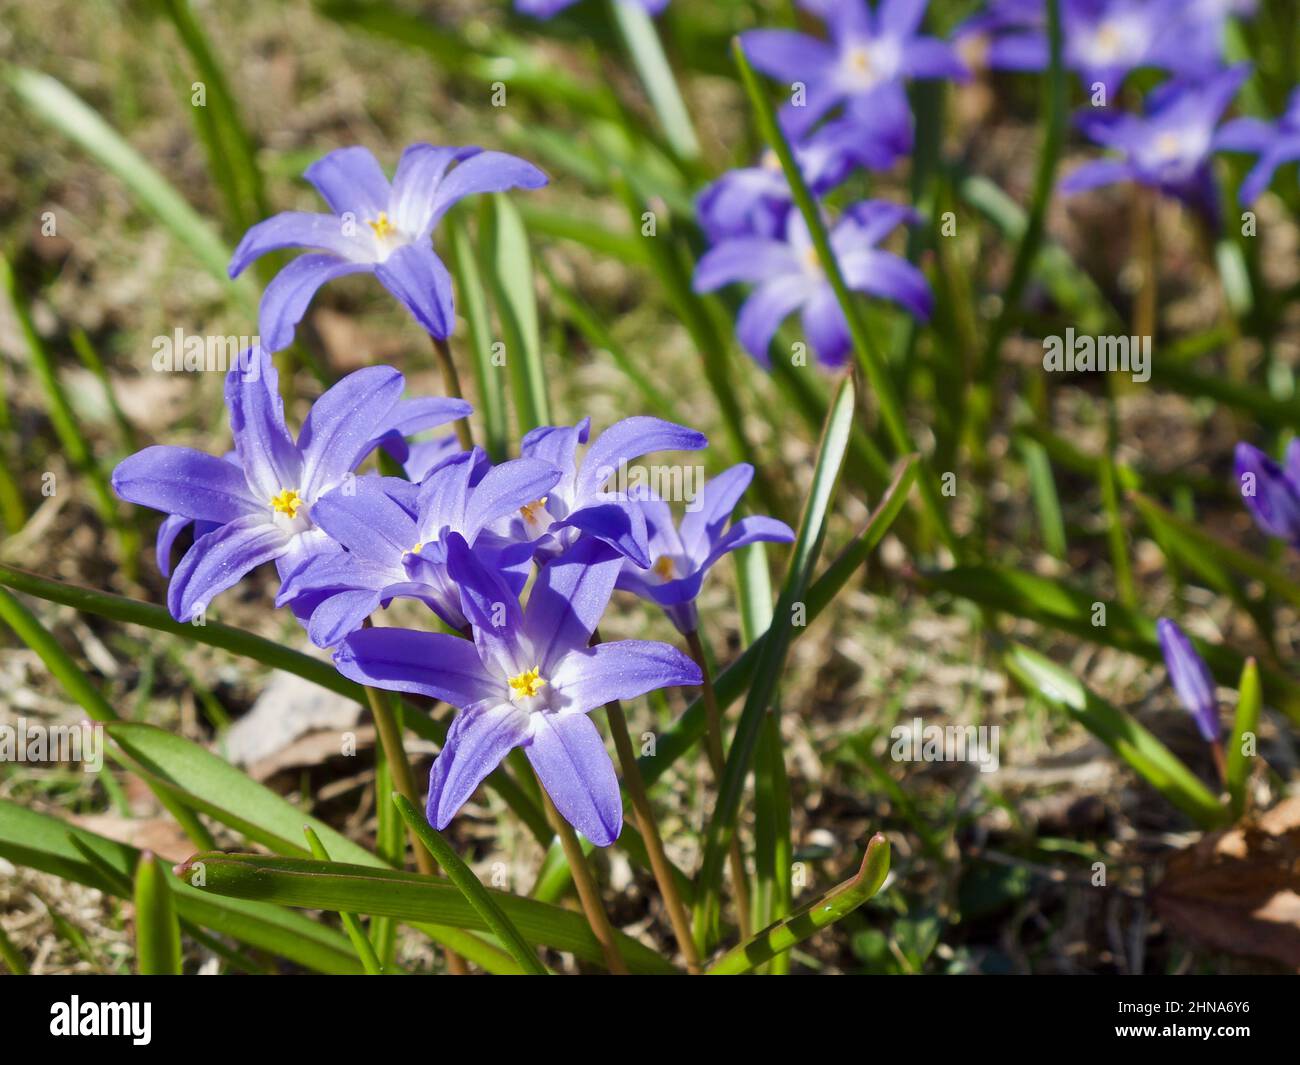 Blue Glory-of-the-snow flowers growing up outdoors in spring. Stock Photo